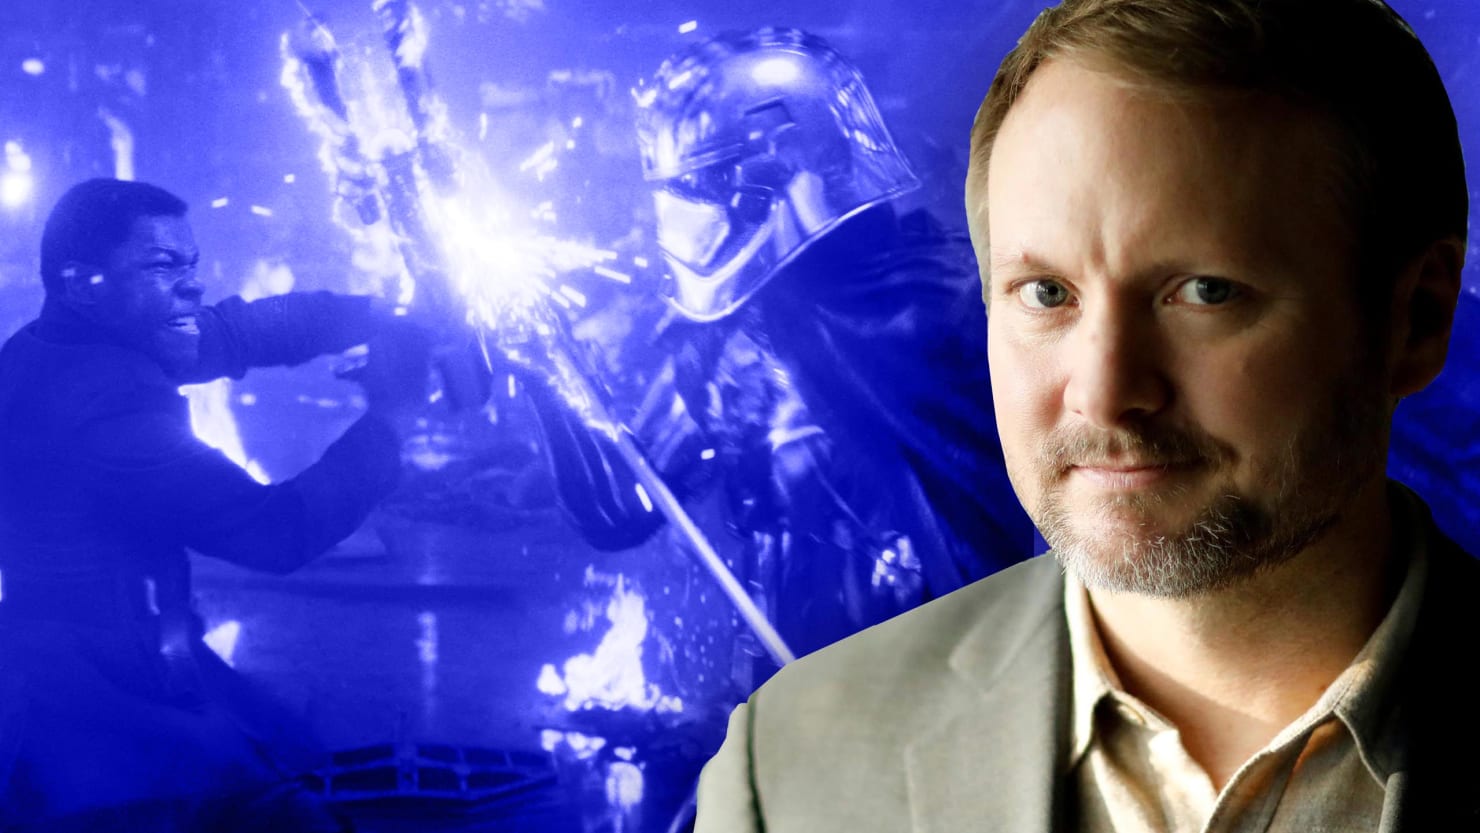 Rian Johnson: 'Hell yes, it's time' for diversity in Star Wars